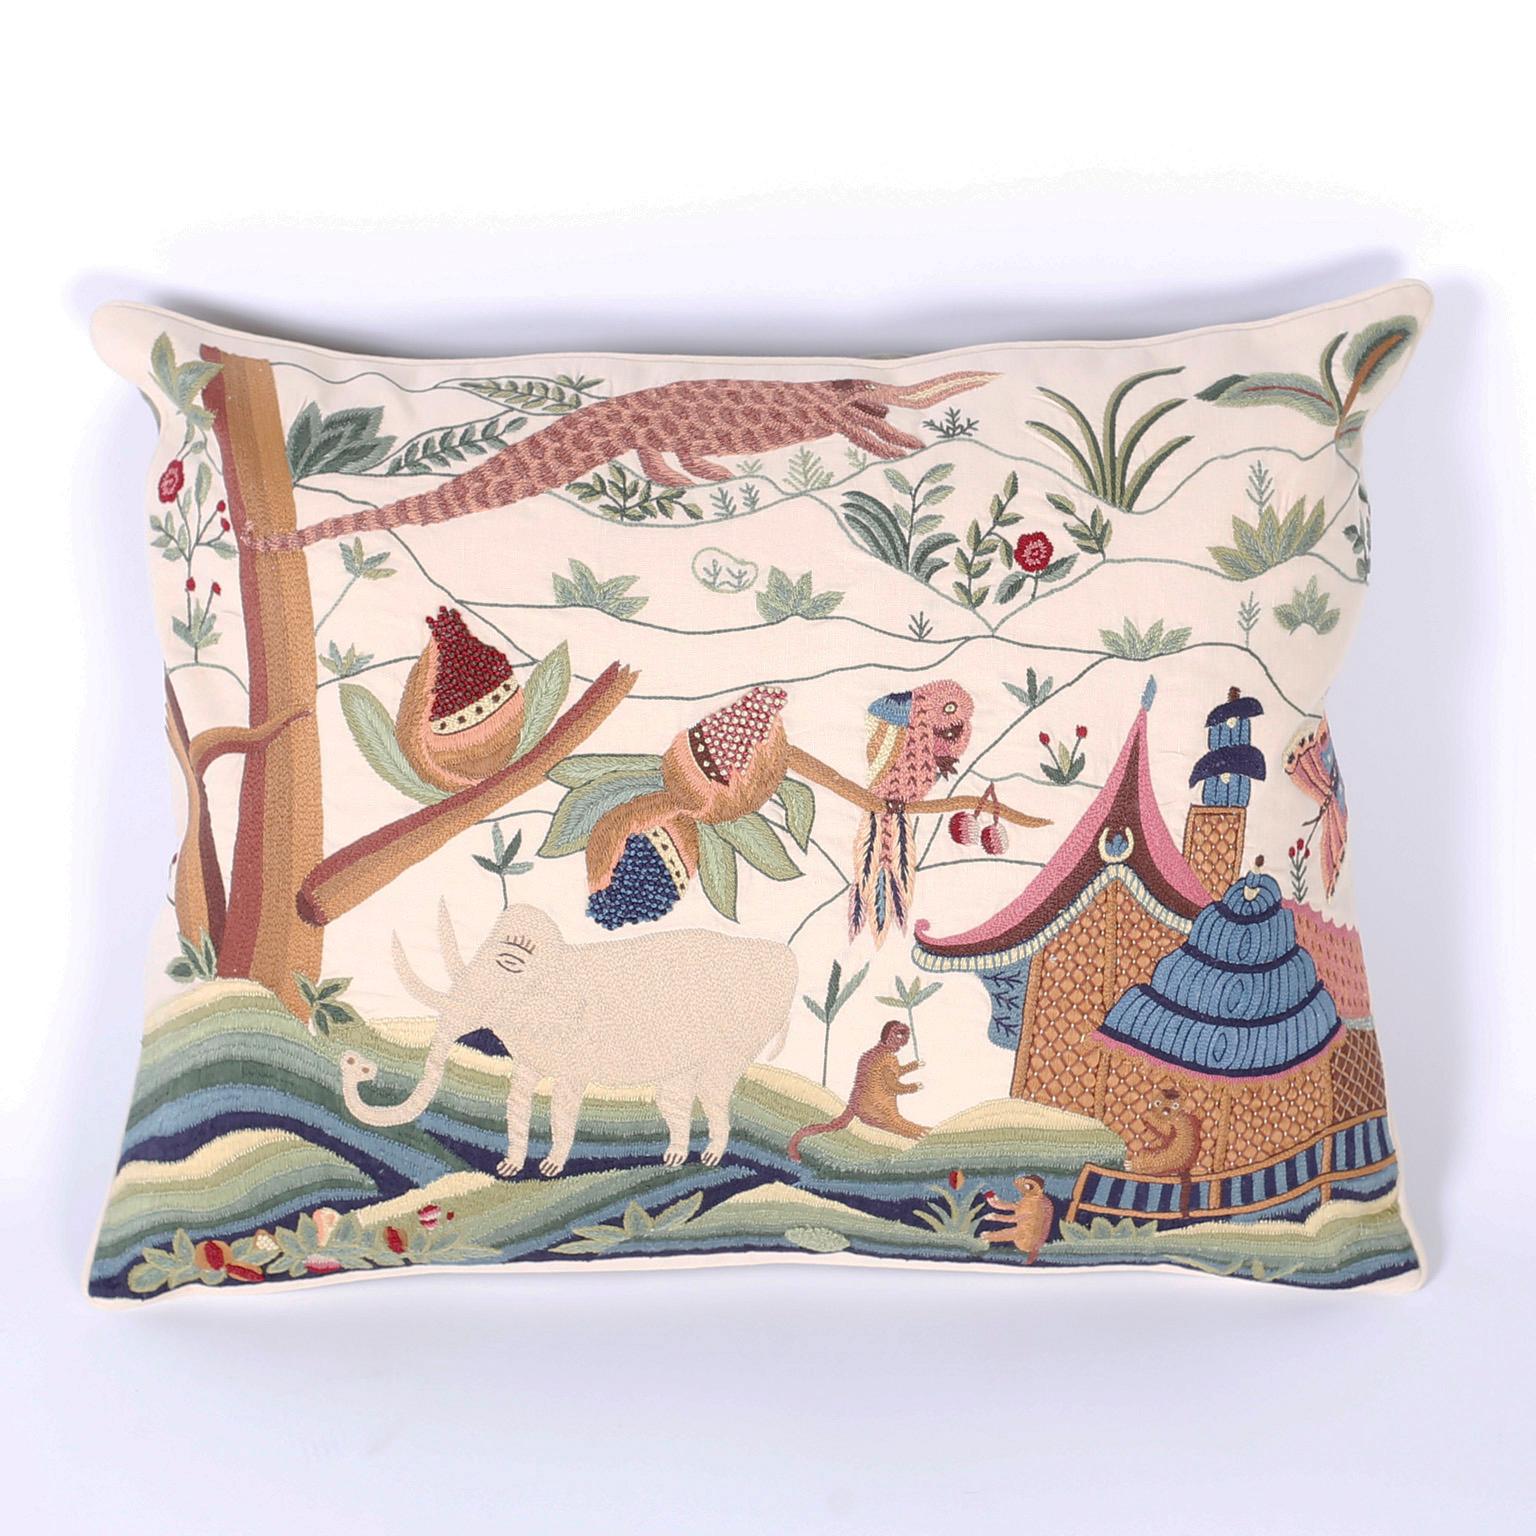 Fanciful pair of needlework pillows depicting an amusing array of animals; featuring an elephant, an alligator, birds, monkeys, plants, and a pagoda. Priced individually.